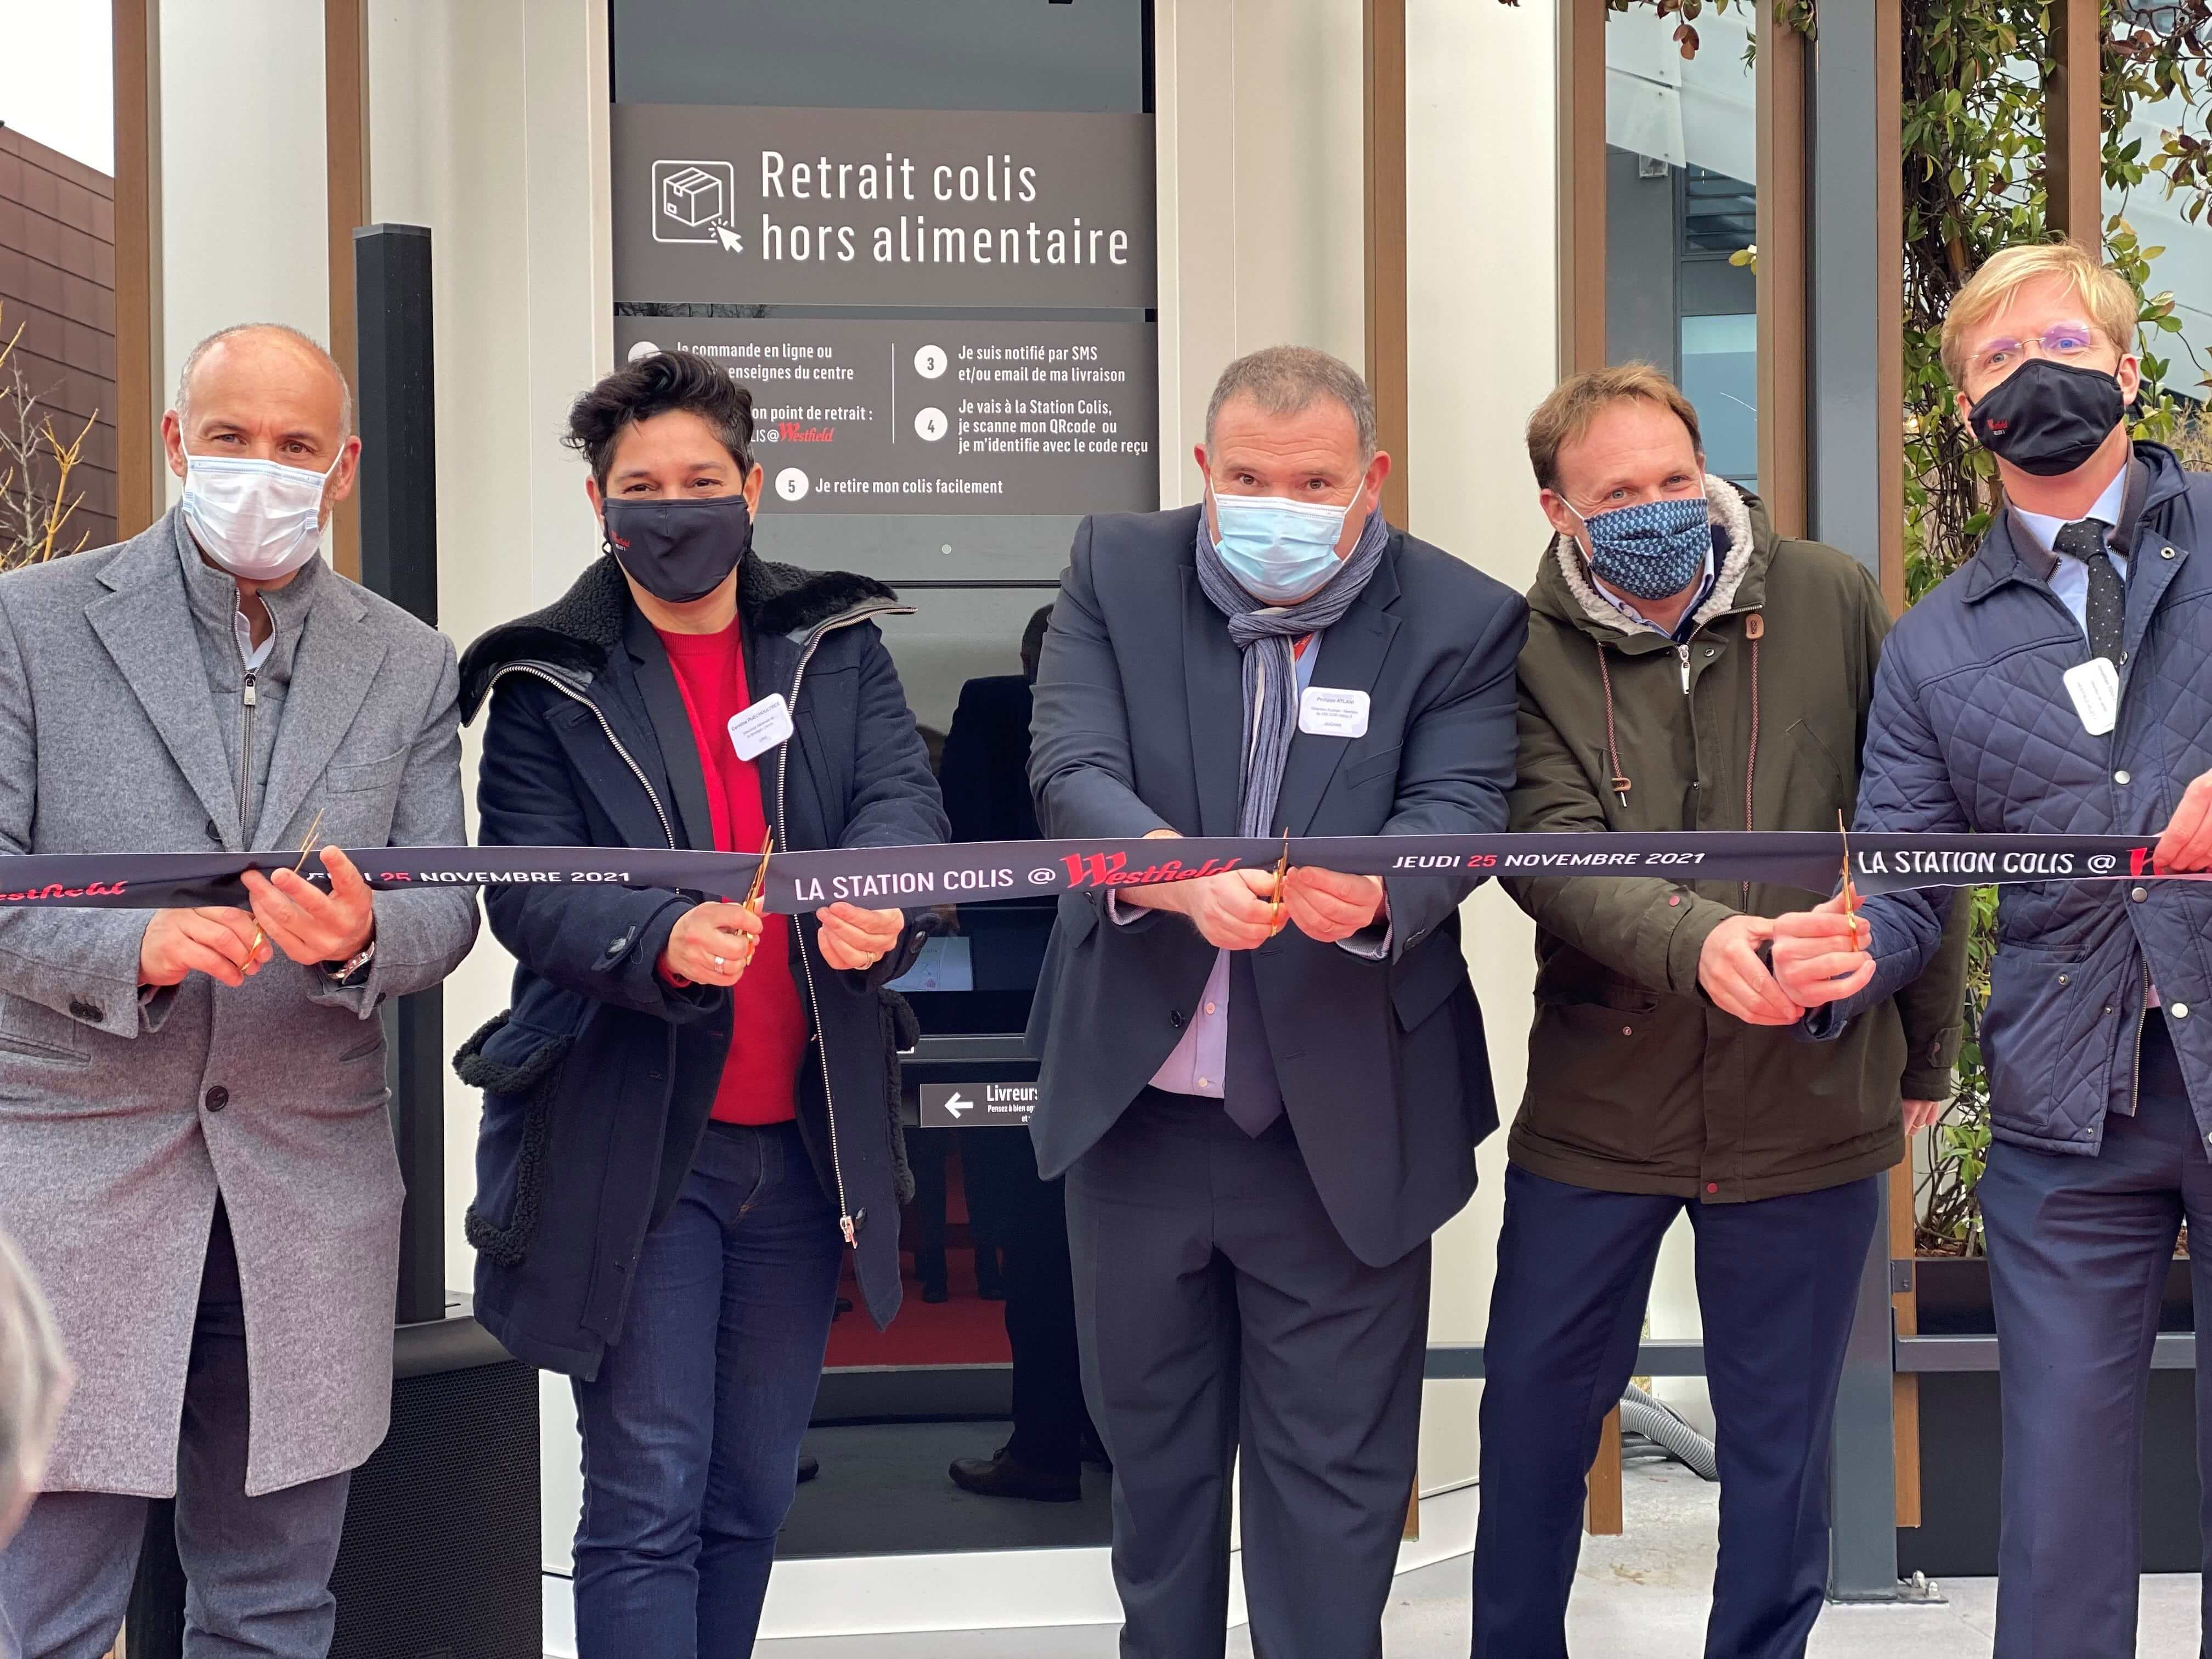 Station Colis@Westfield was inaugurated in the presence of URW Chief Customer Officer Caroline Puechoultres, Director of PMPS France & Europe and Shopping Center Experience Europe Alexis Veron and Westfield Vélizy 2 Shopping Centre Manager Jonathan Toulemonde. 